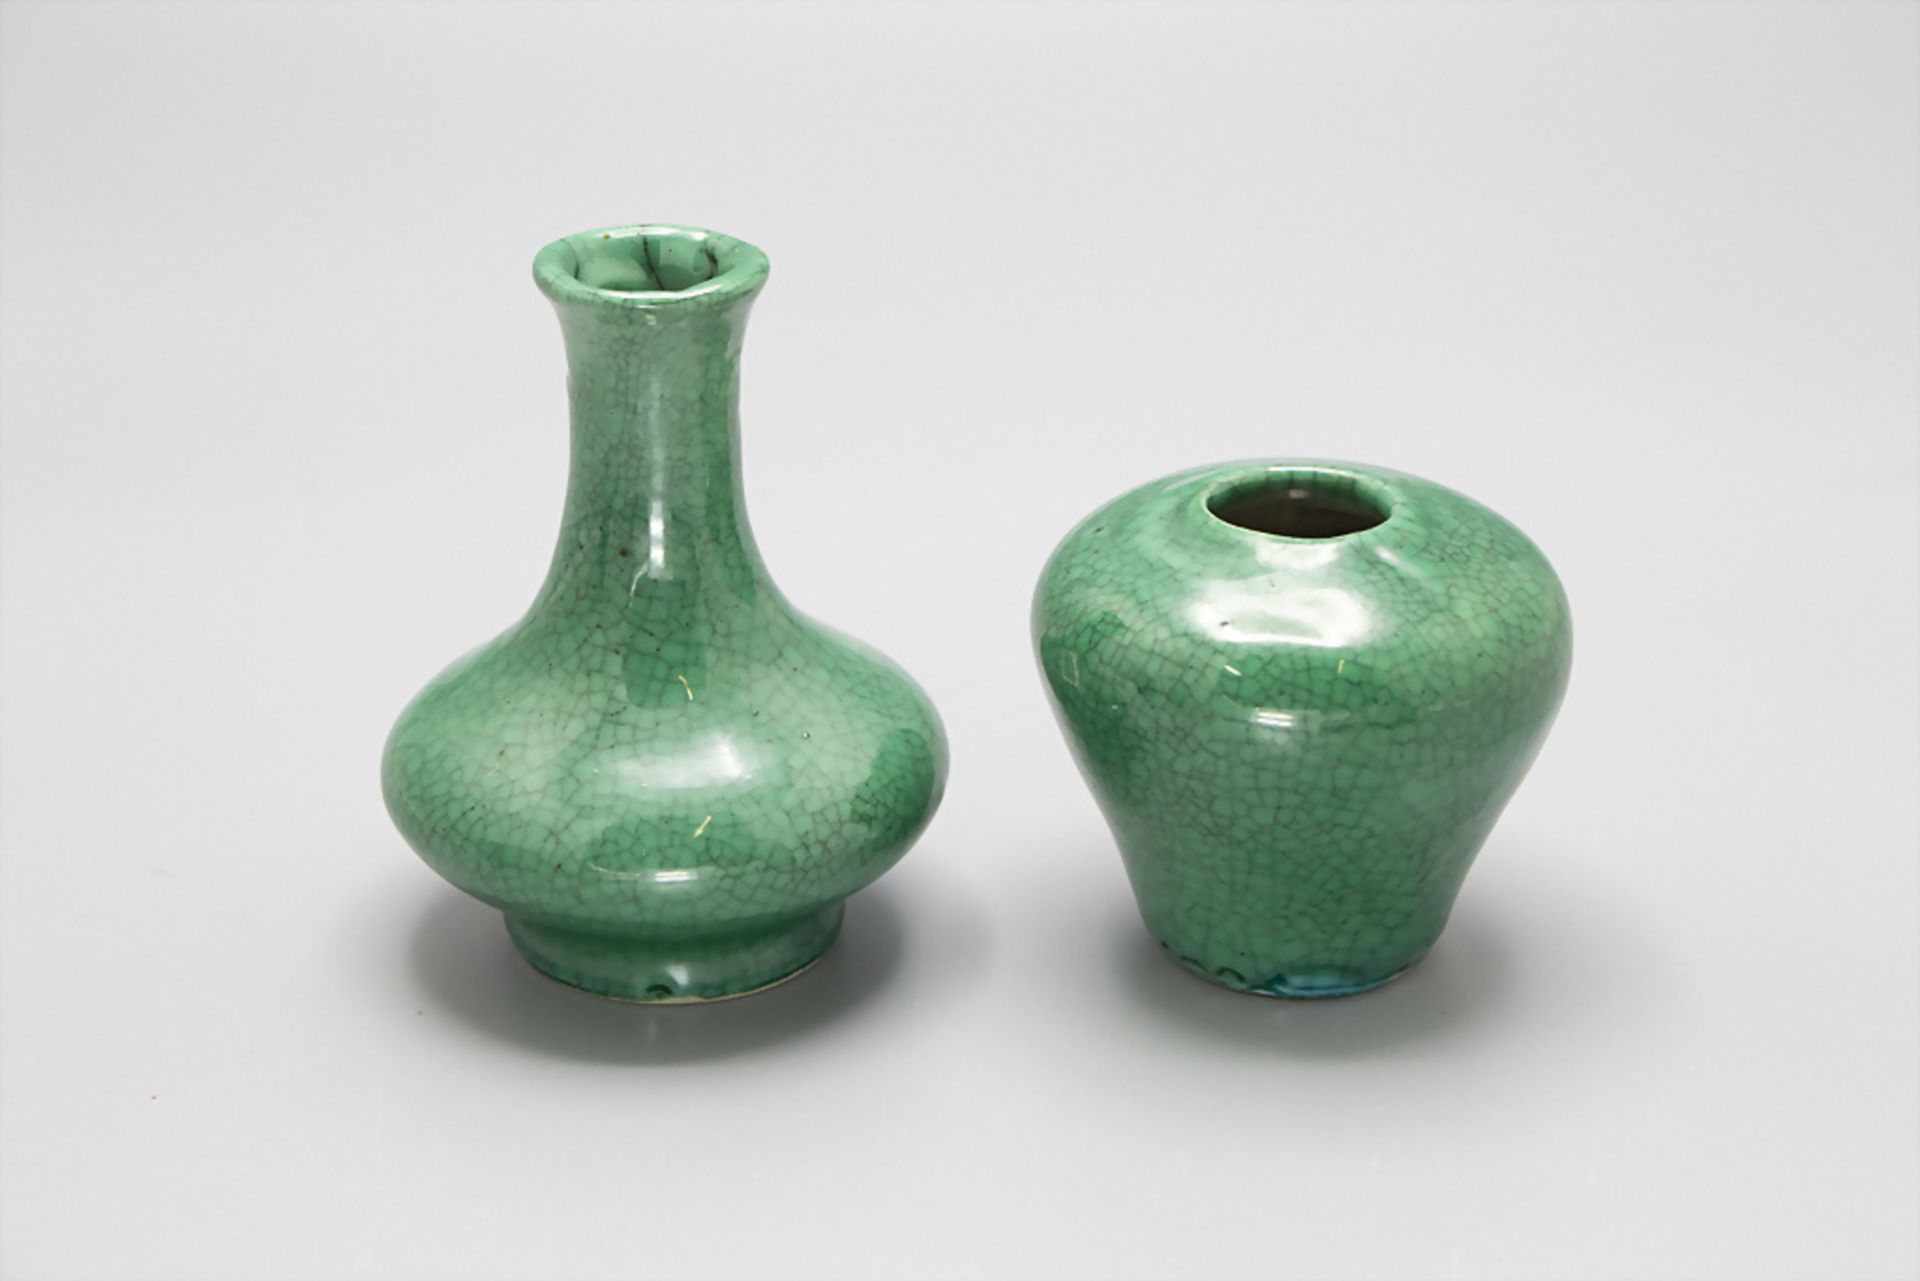 Paar kleine grüne Vasen / A pair of two small green vases, China, Qing-Zeit, 19. Jh. - Image 2 of 3